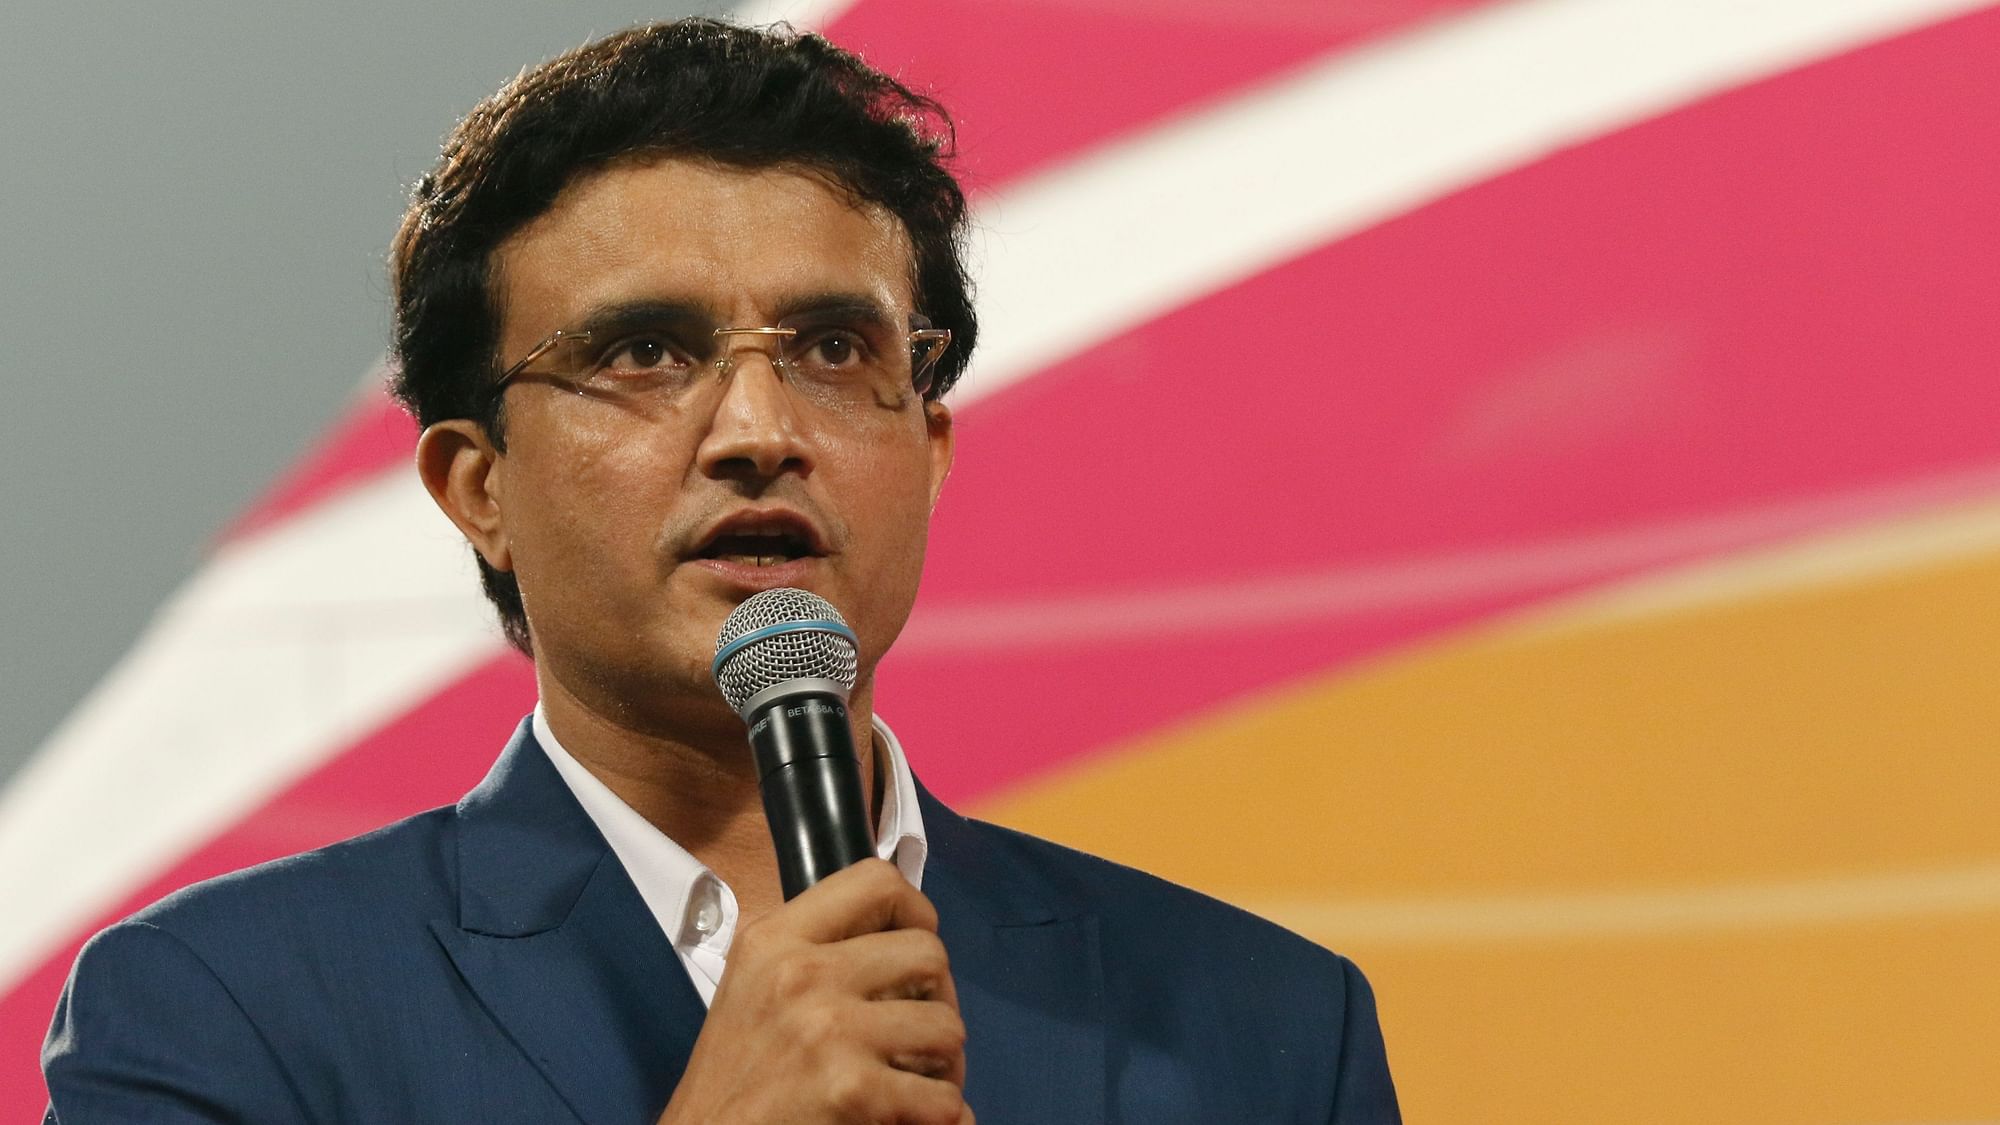 BCCI president Sourav Ganguly will deliver a lecture at the third edition of the Jagmohan Dalmiya annual conclave on 17 March, on the eve of India’s third and final ODI against South Africa at the Eden Gardens in Kolkata.